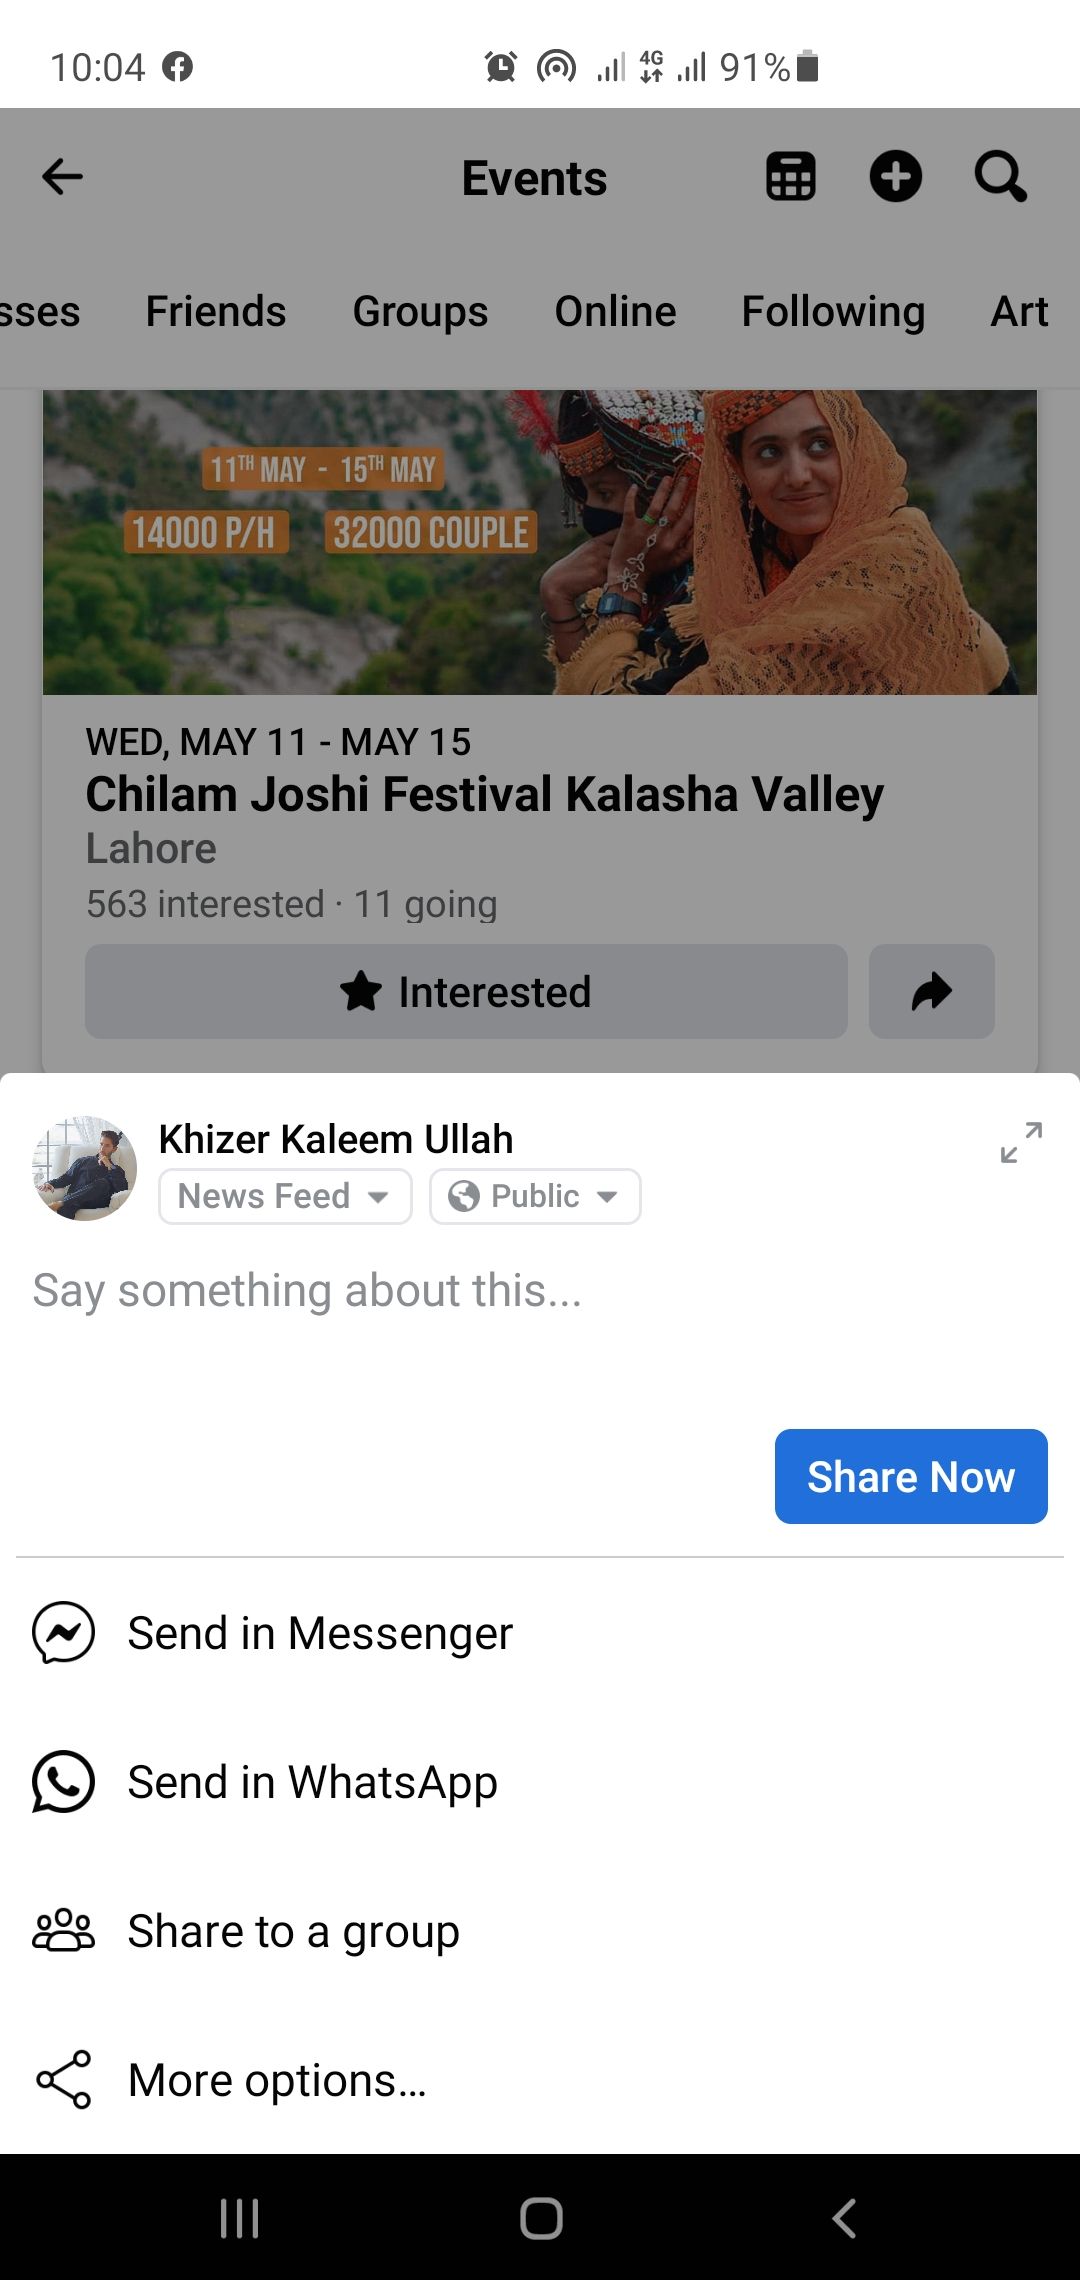 Share events in a group